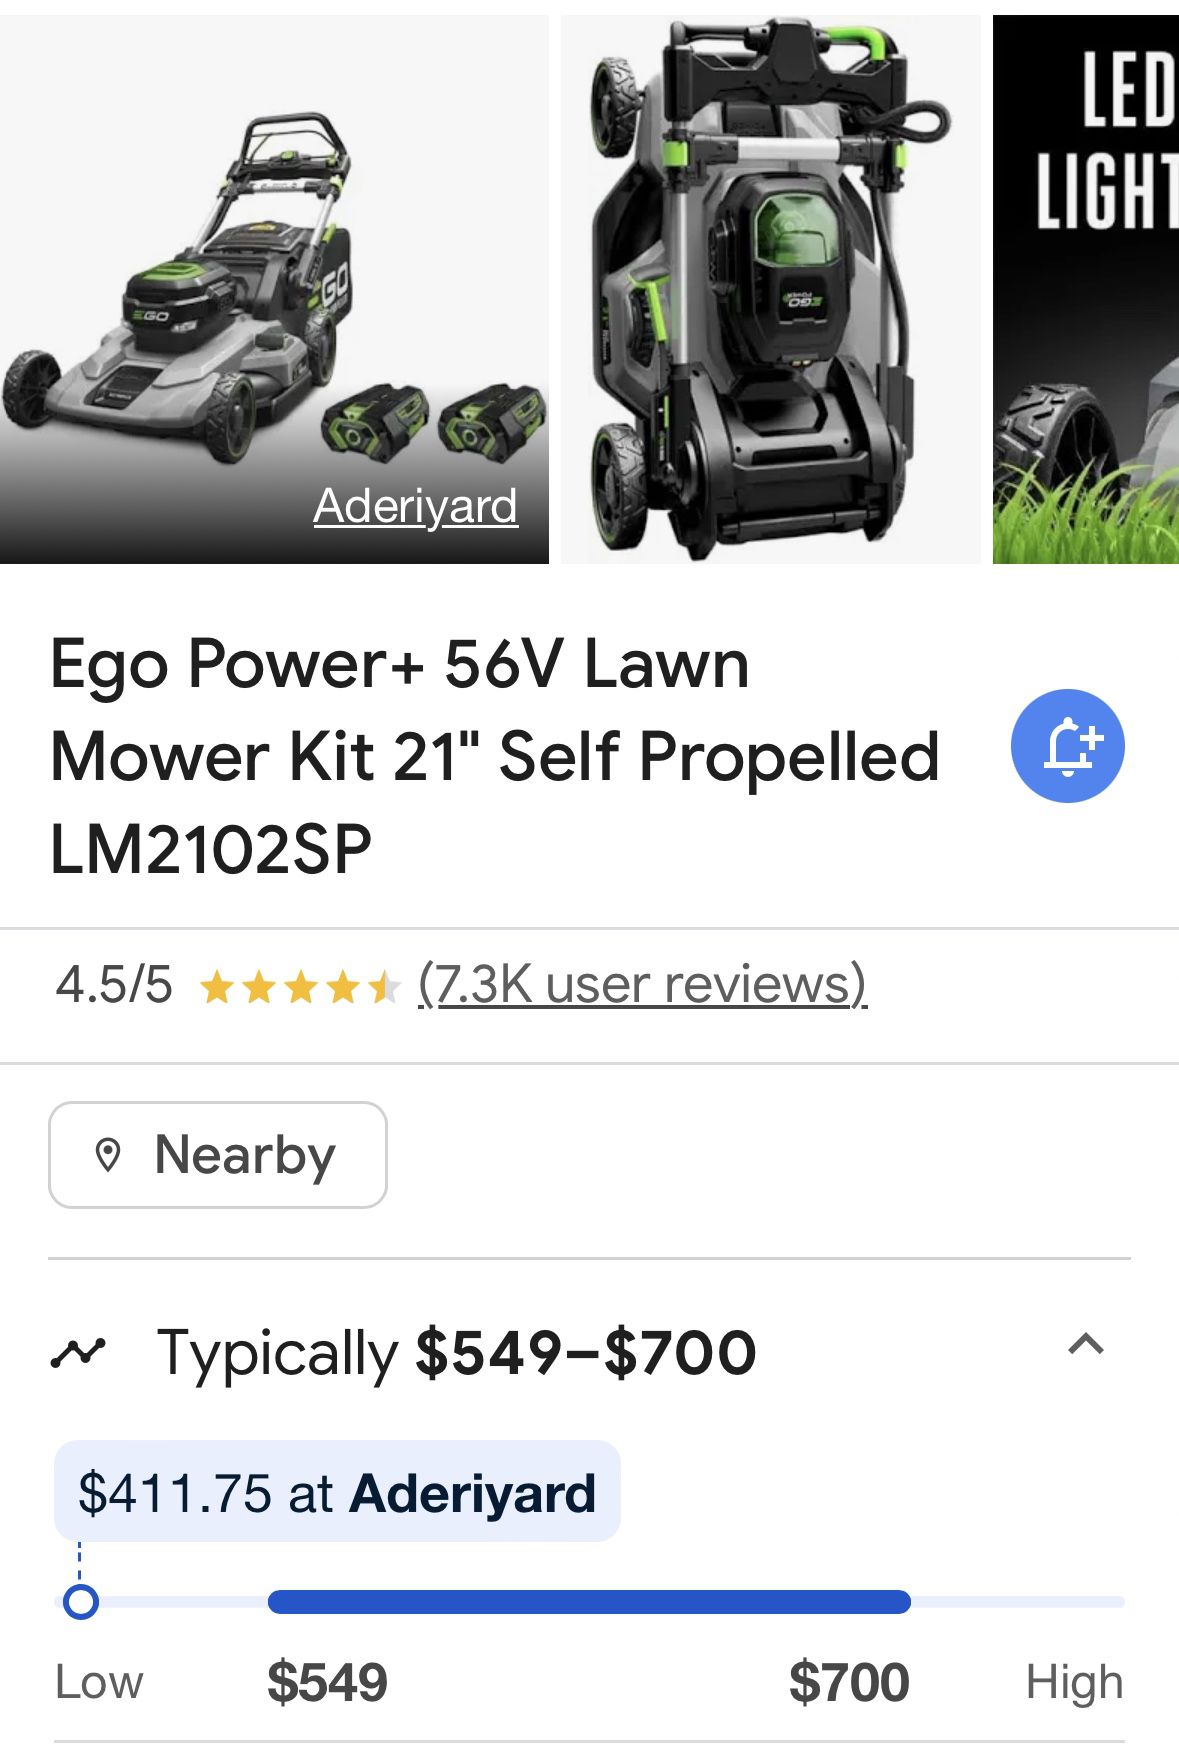 EGO BATTERY POWERED SELF PROPELLED 21” LAWN MOWER 